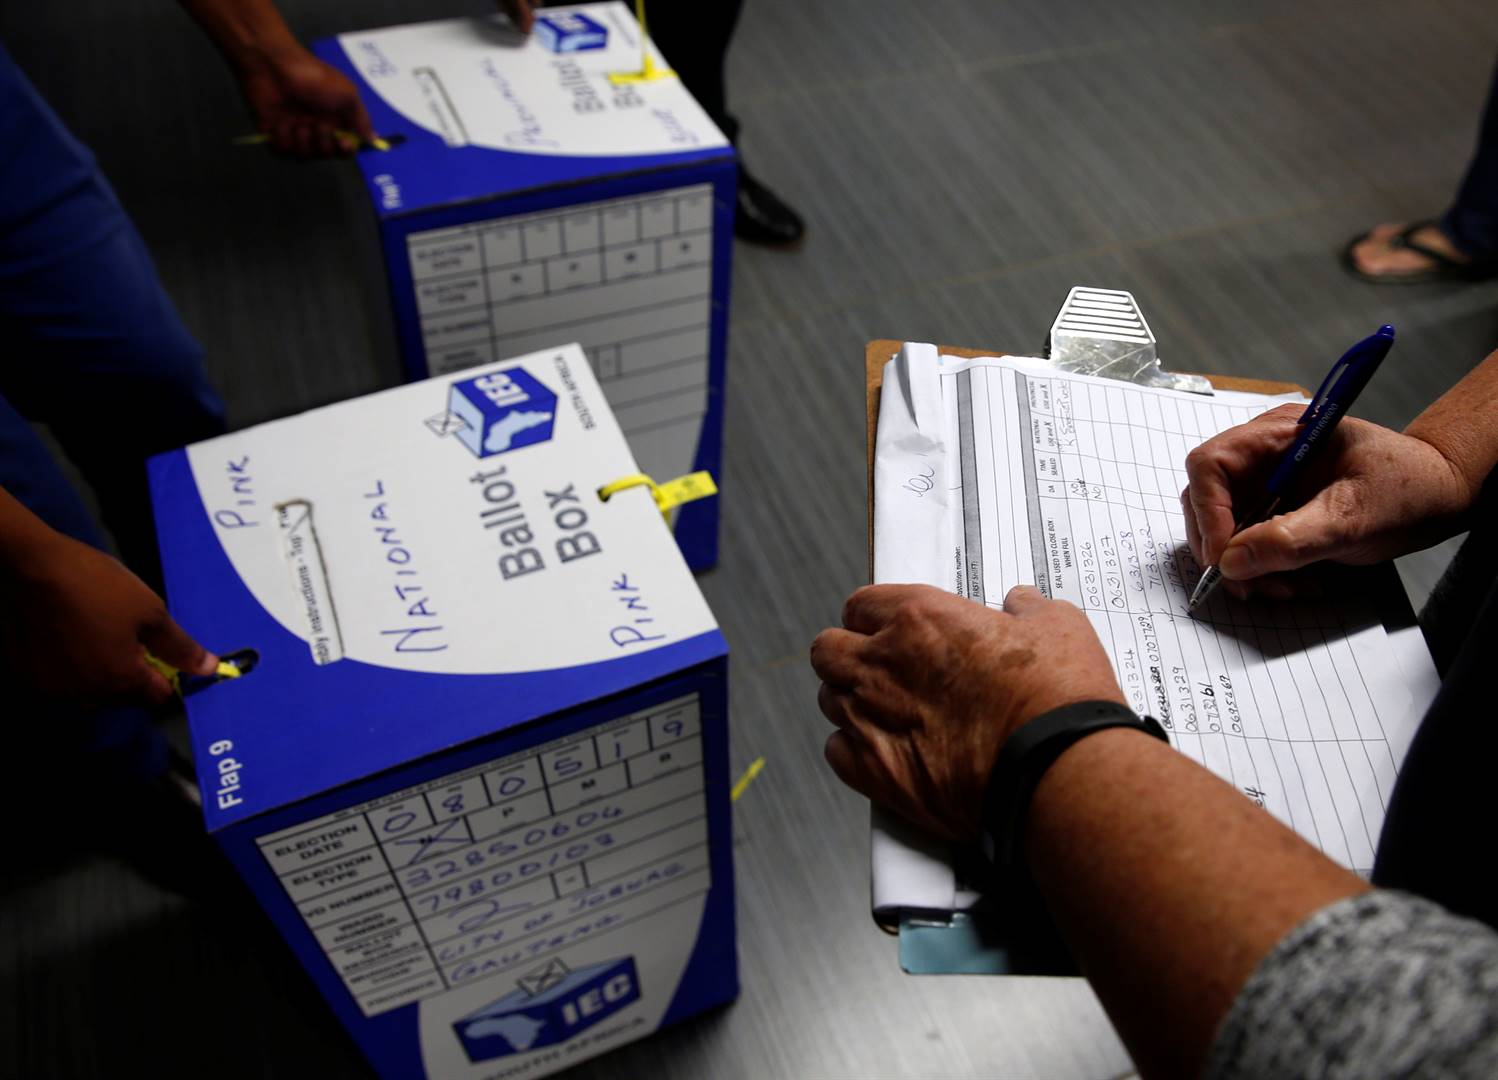 Election officials seal ballot boxes at the end of voting at a polling station in Johannesburg last night. Counting is under way – just over a quarter of the votes have been counted. Picture: Philimon Bulawayo/Reuters